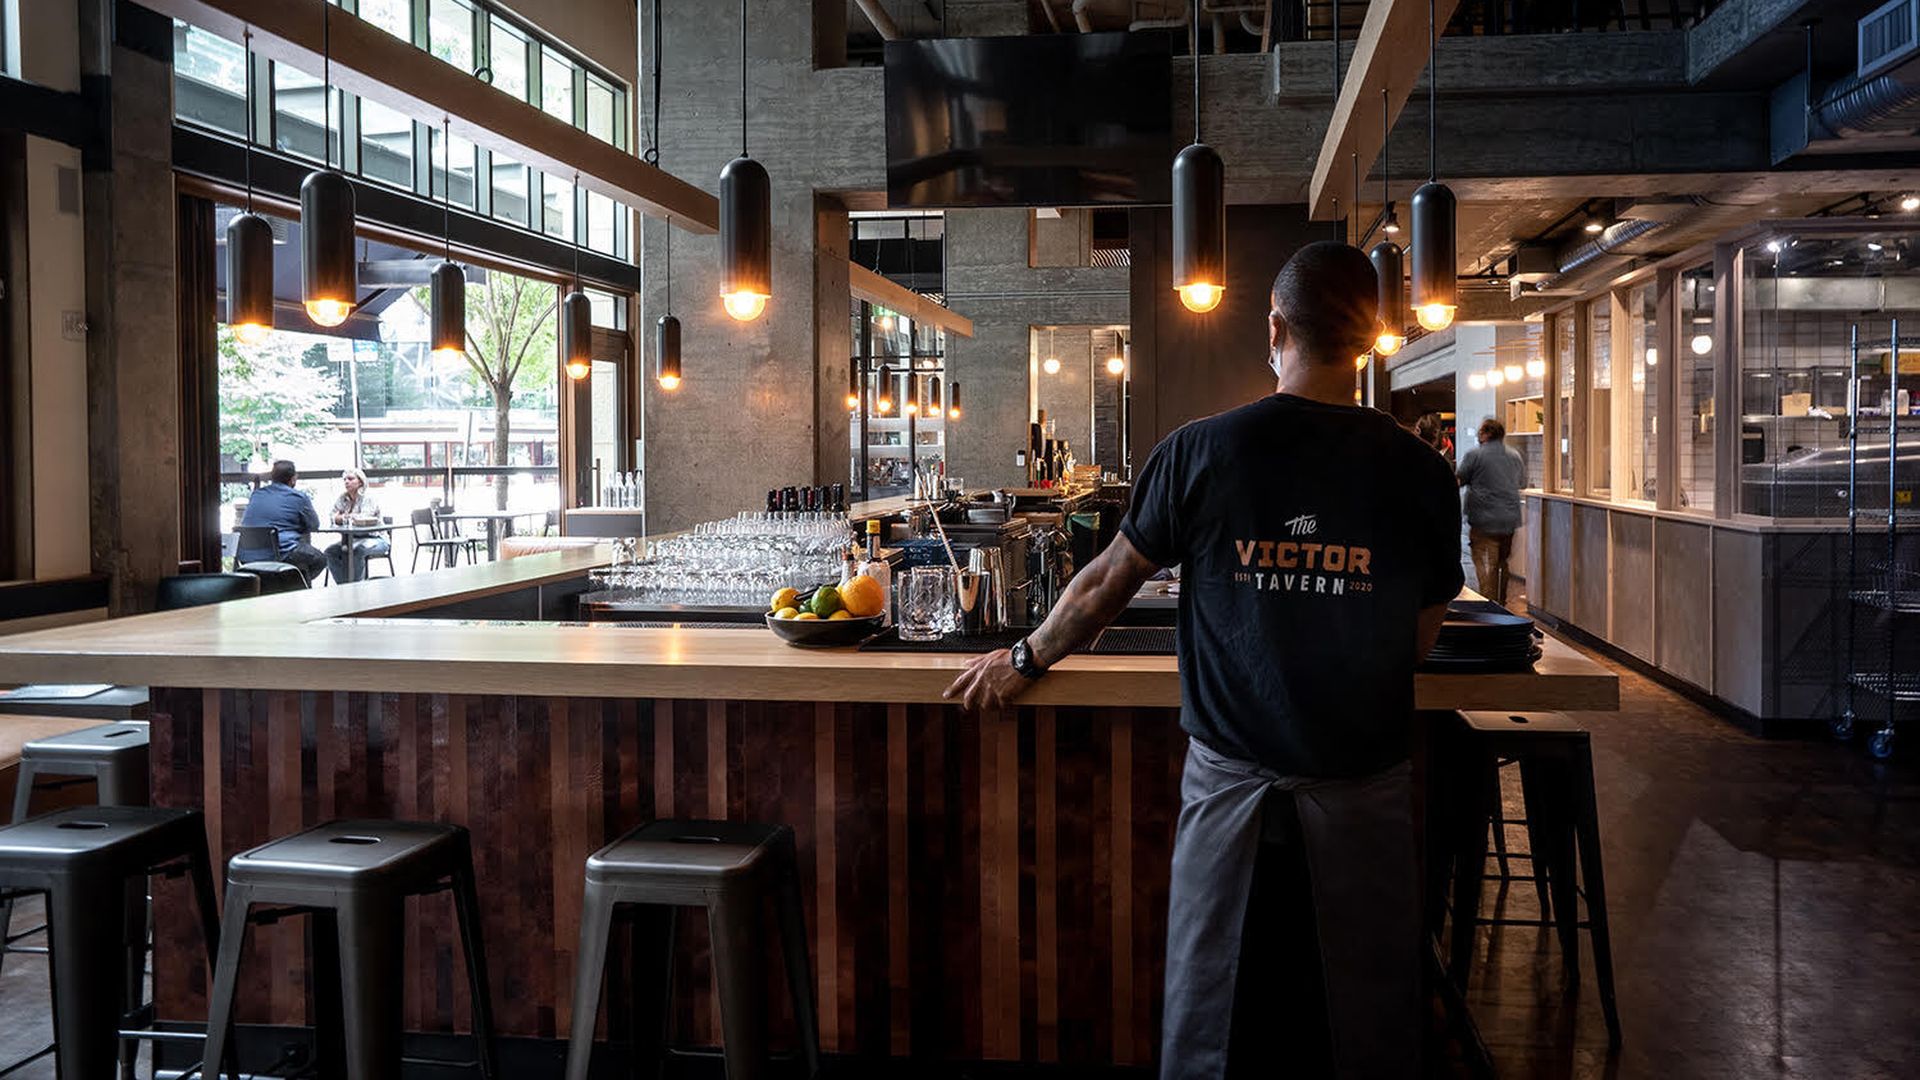 A restaurant worker stands on the outer edge of an empty barstool seating area facing a kitchen.